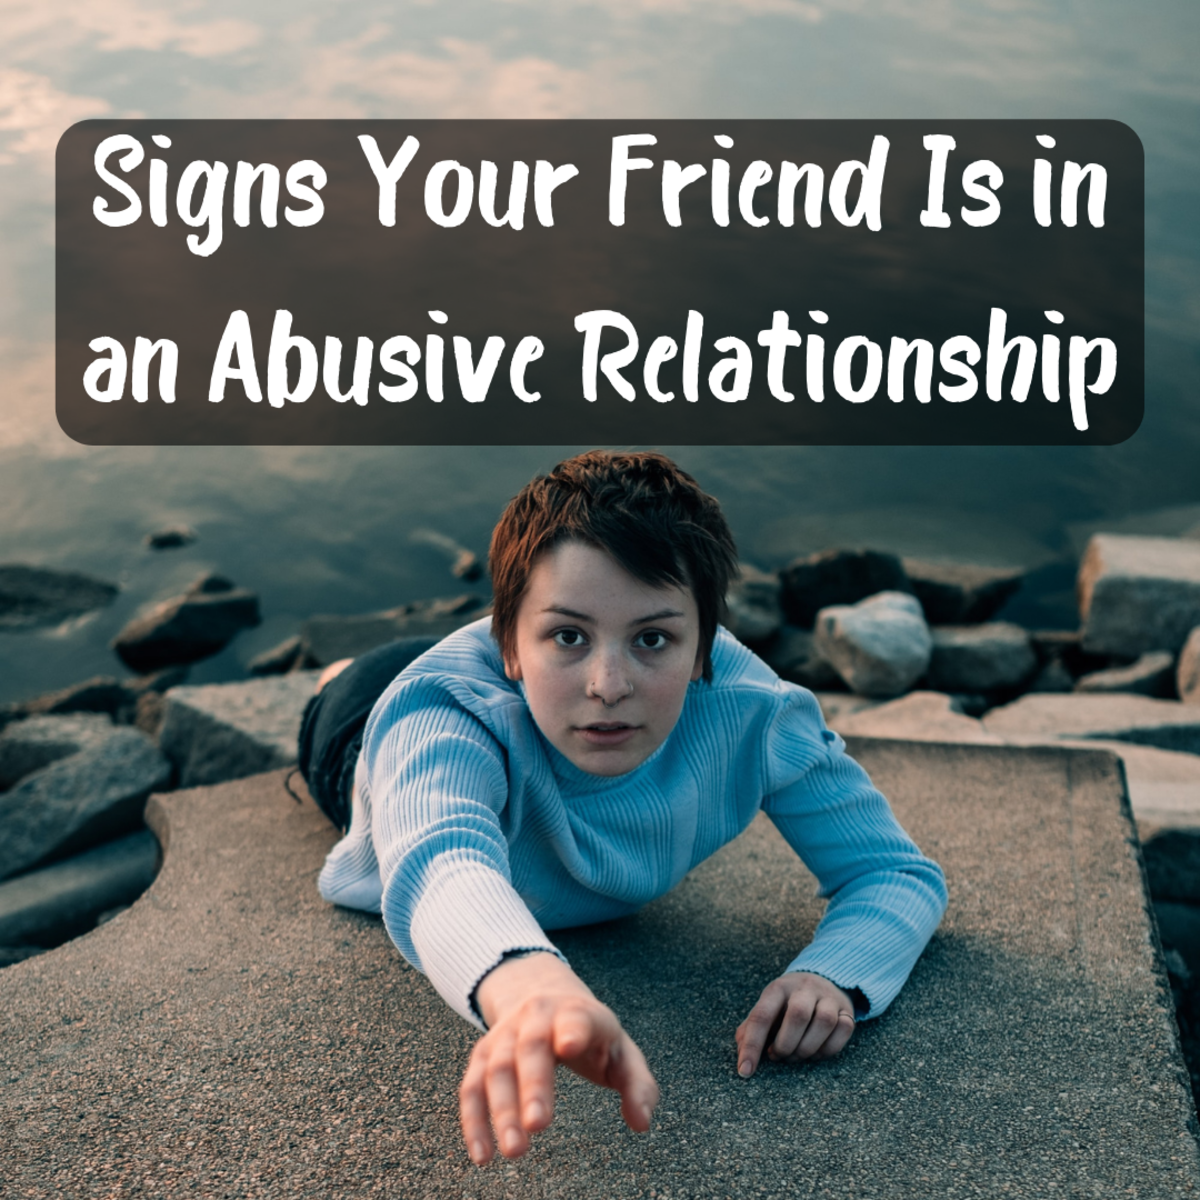 Learn how to read the signs of an abusive relationship. Read on to find out how to tell if someone is being physically, emotionally, psychologically, and/or financially abused.